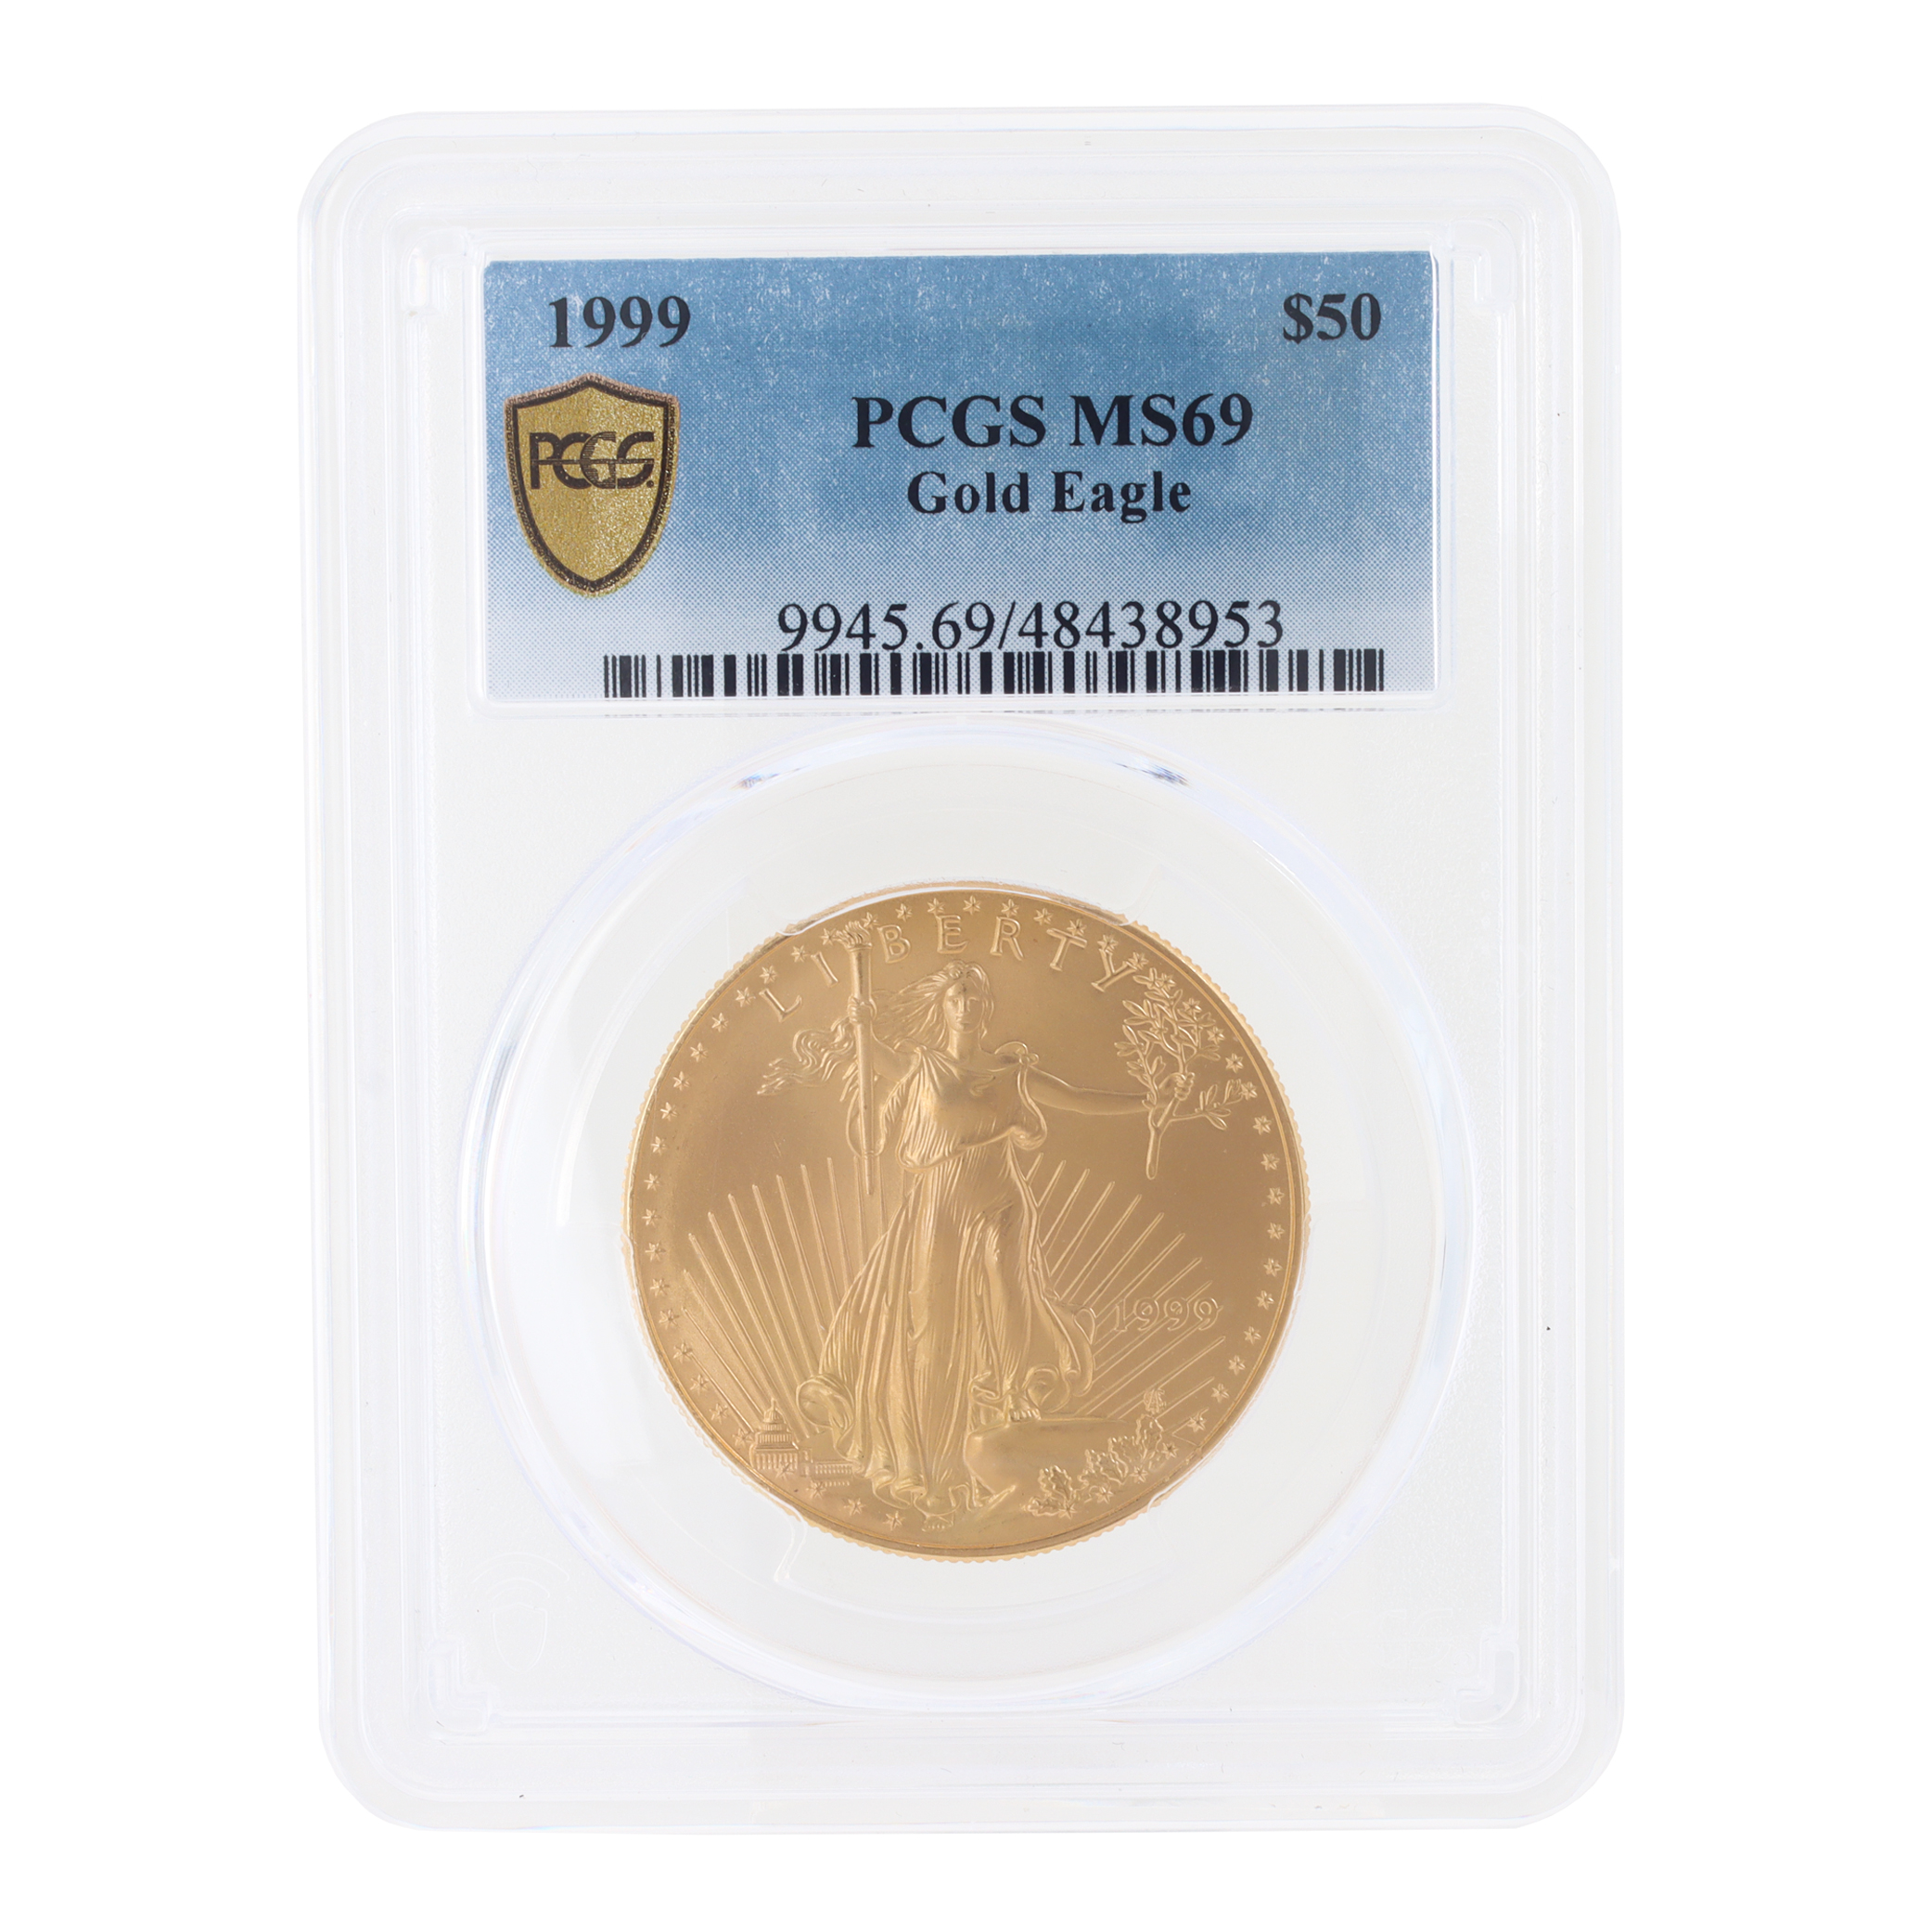 $50 Gold American Eagle Coin from 1999. Uncirculated PCGS grading of MS69